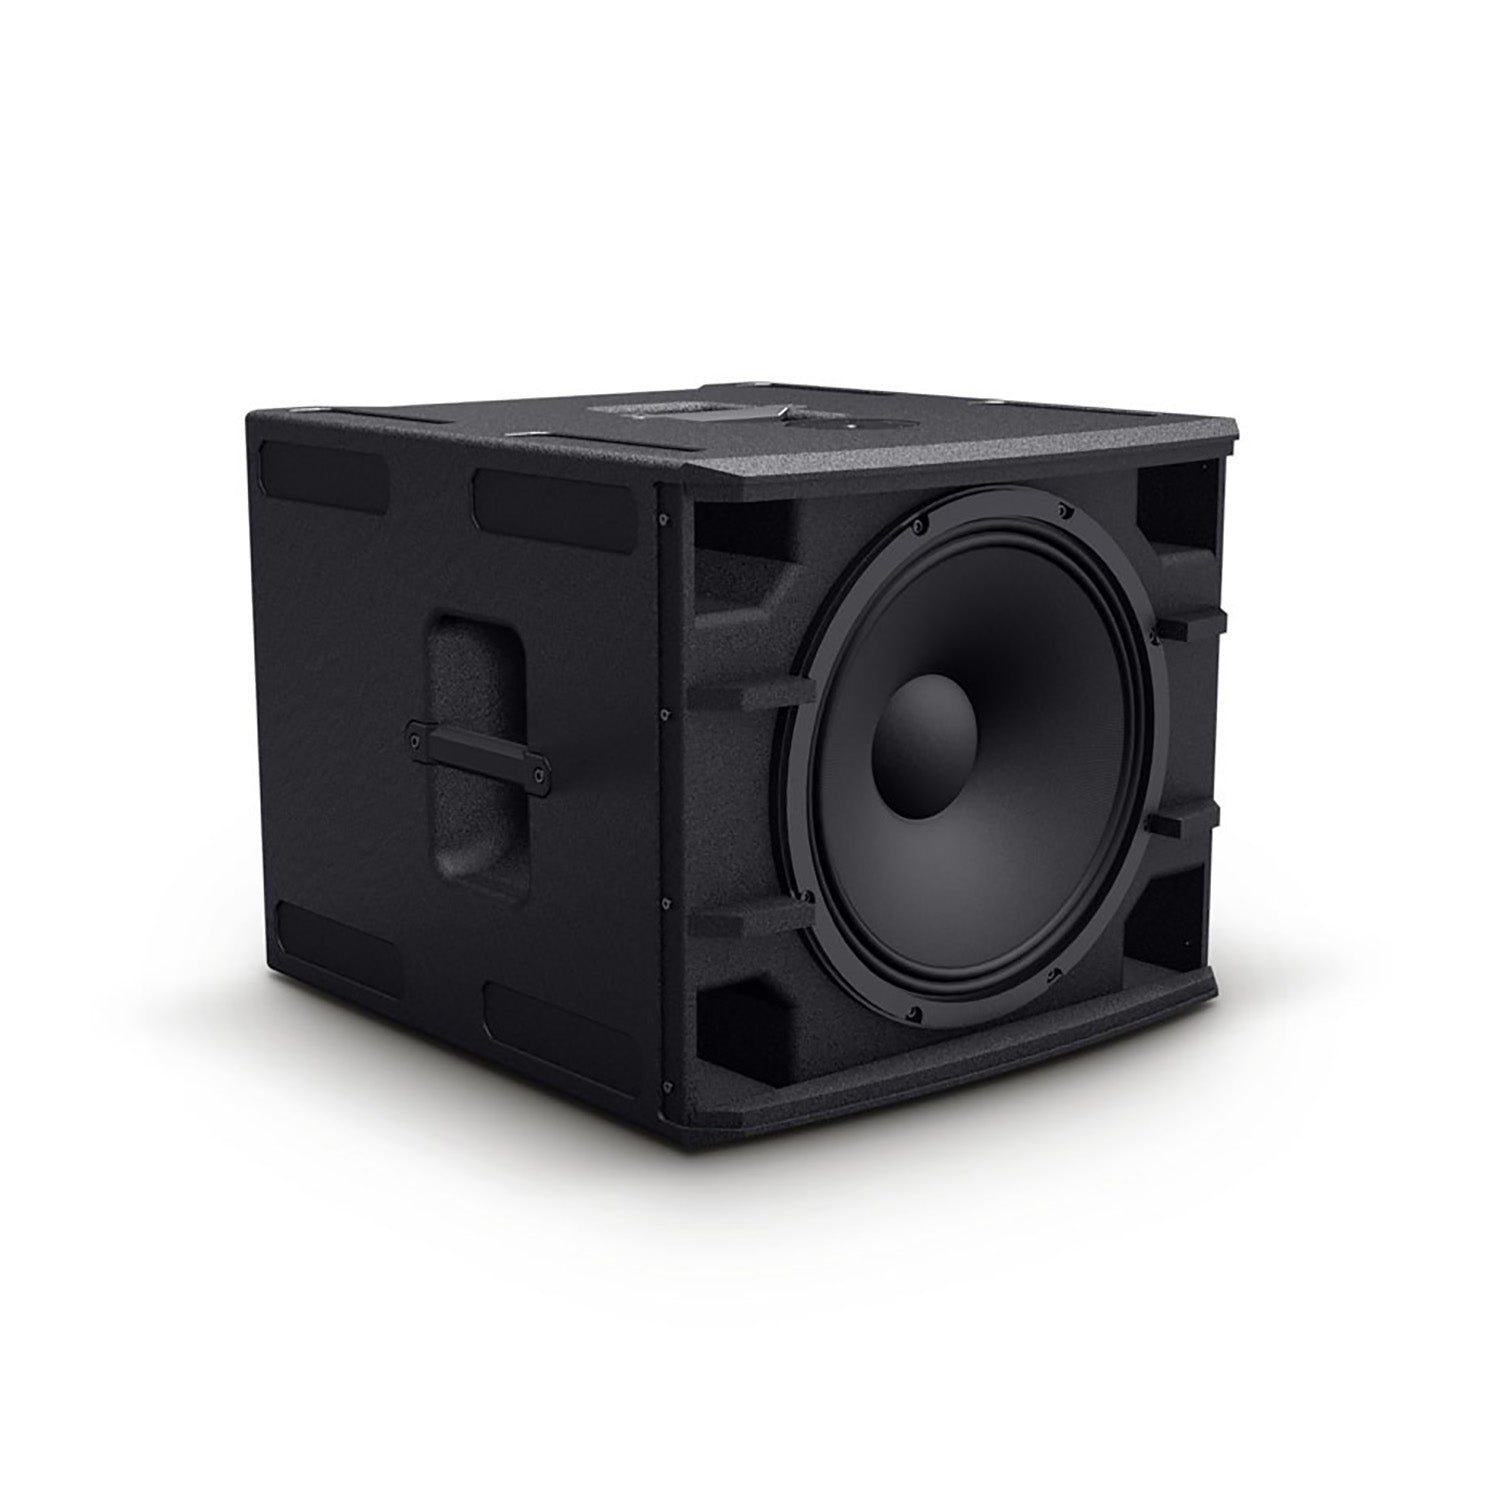 LD Systems STINGER SUB 15 A G3, 15 Inches Active Bass-Reflex PA Subwoofer LD Systems